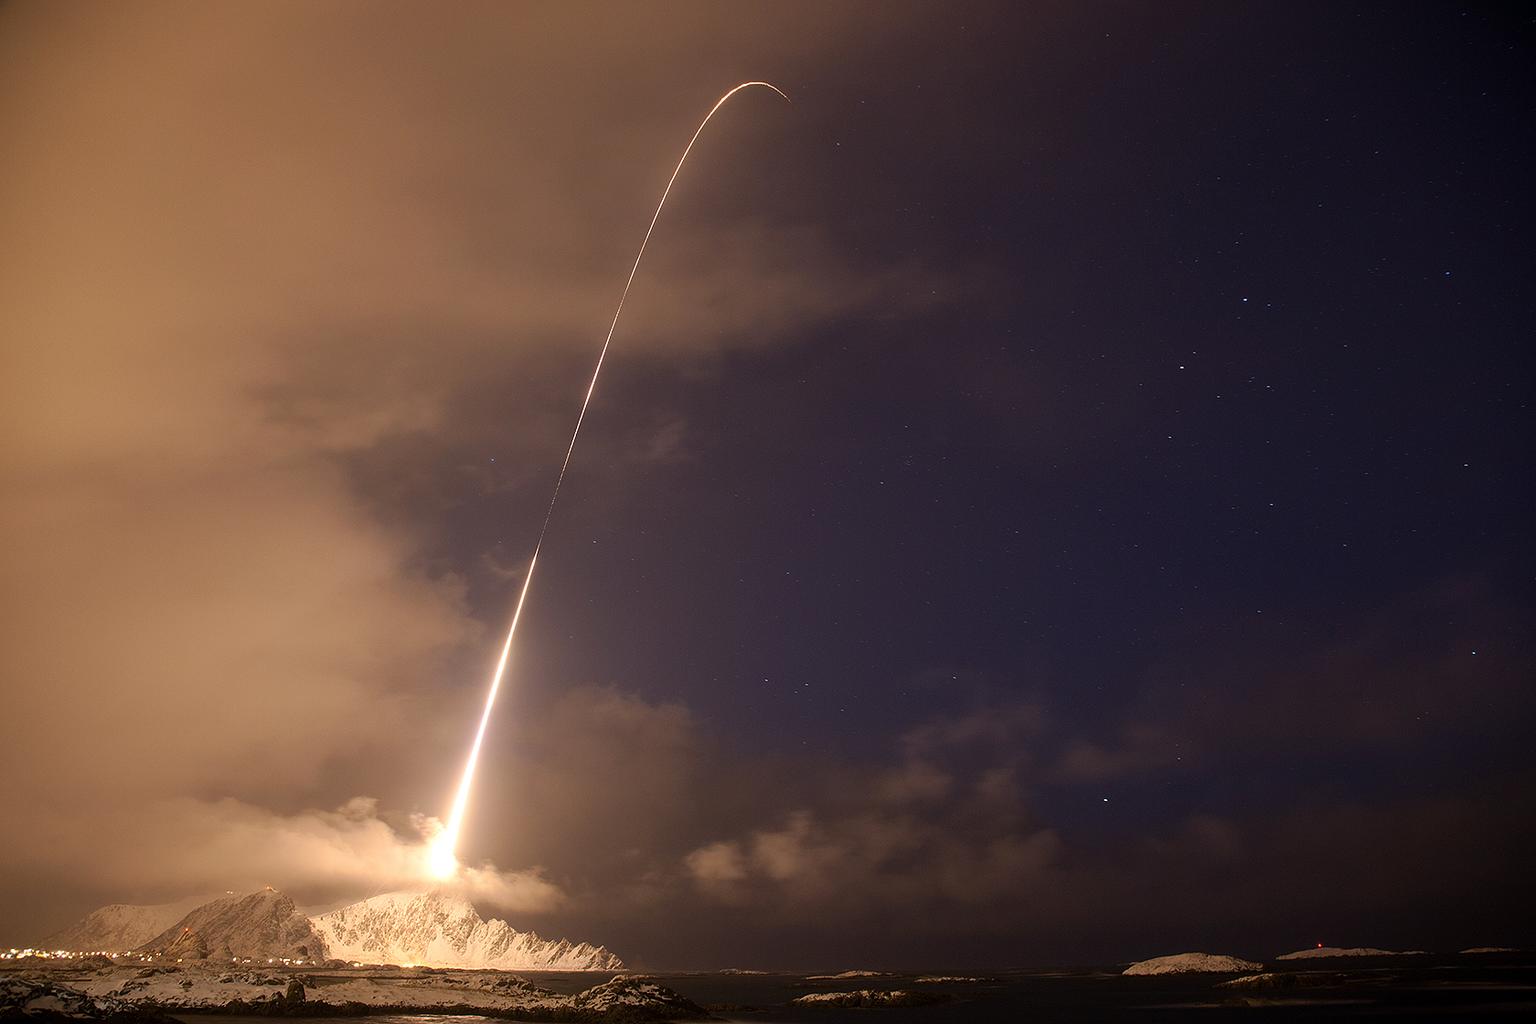 Source: NASA-Photographers captured these digital photos of a four-stage Black Brant XII sounding rocket and the aurora borealis on December 12, 2010, during the NASA-funded Rocket Experiment for Neutral Upwelling (RENU).